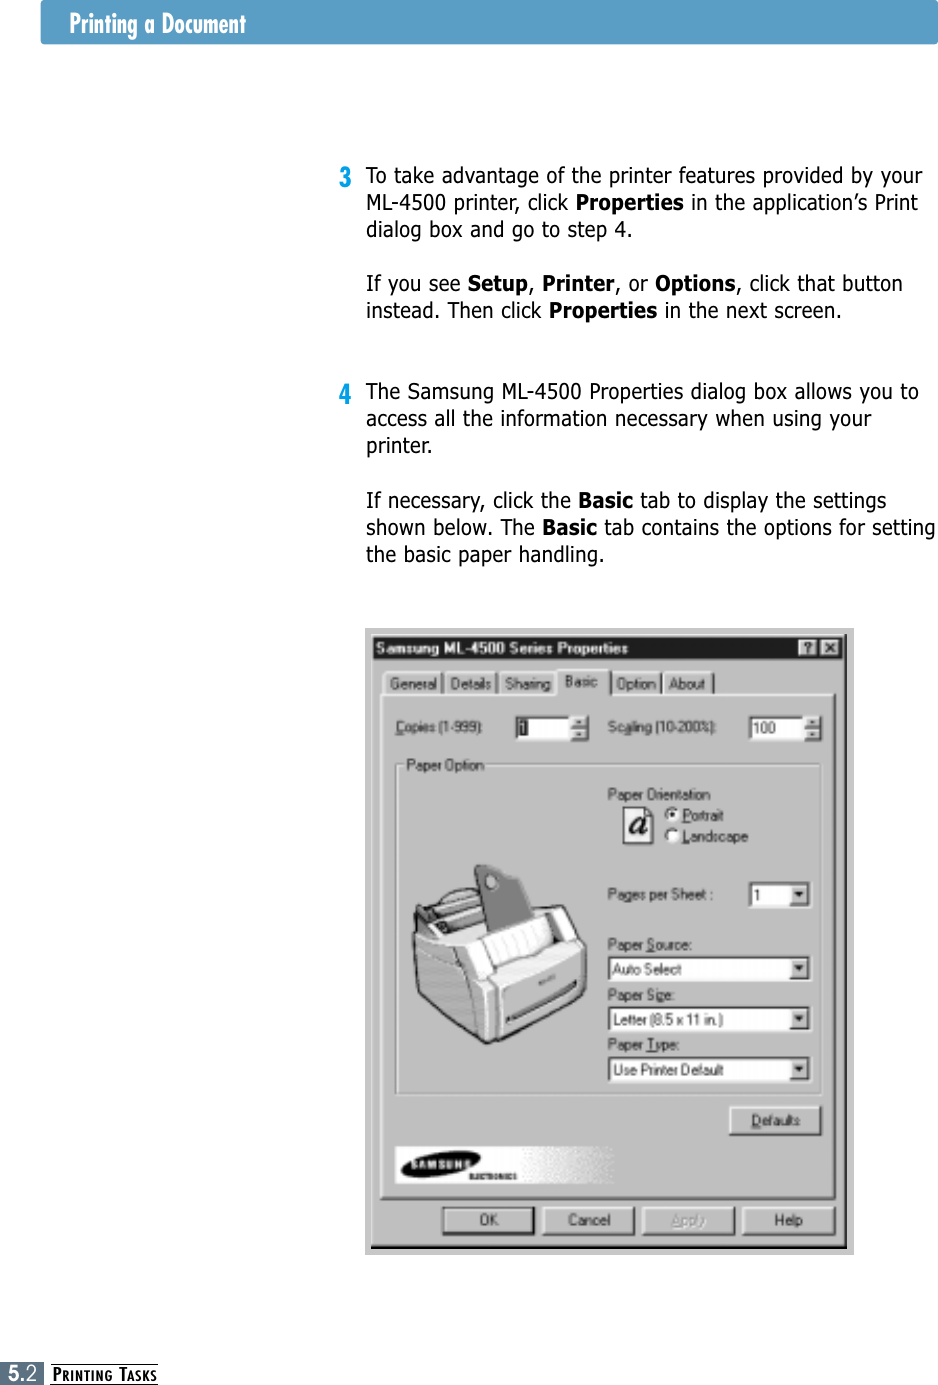 PRINTING TASKS5.2Printing a Document3To take advantage of the printer features provided by yourML-4500 printer, click Properties in the application’s Printdialog box and go to step 4. If you see Setup, Printer, or Options, click that buttoninstead. Then click Properties in the next screen.4The Samsung ML-4500 Properties dialog box allows you toaccess all the information necessary when using yourprinter.If necessary, click the Basic tab to display the settingsshown below. The Basic tab contains the options for settingthe basic paper handling.